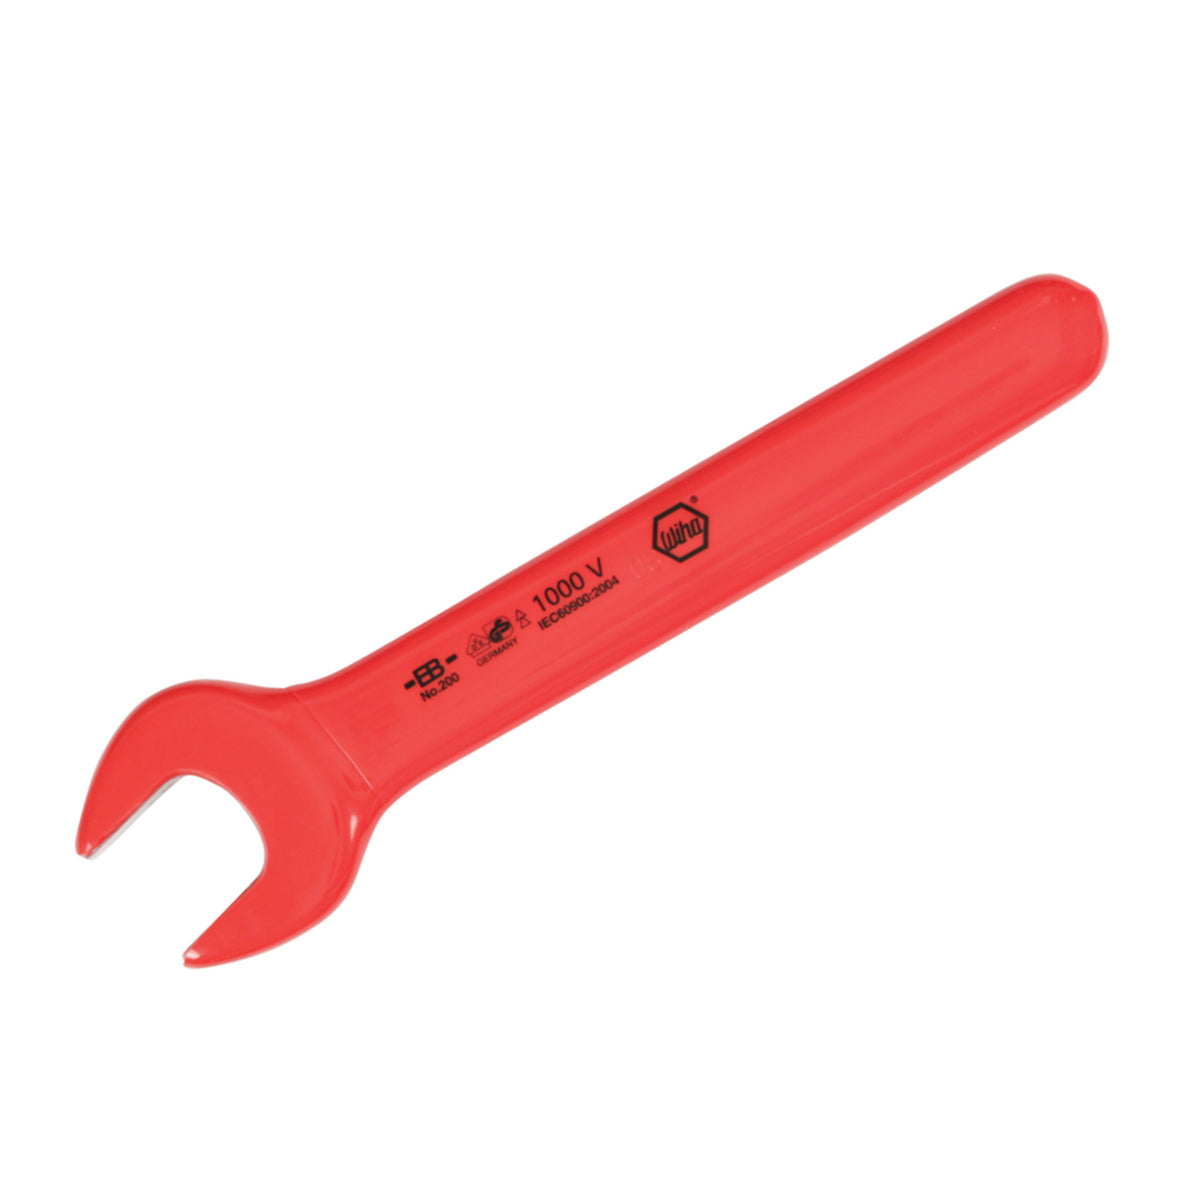 Wiha 20144 Insulated Open End Wrench 13/16"